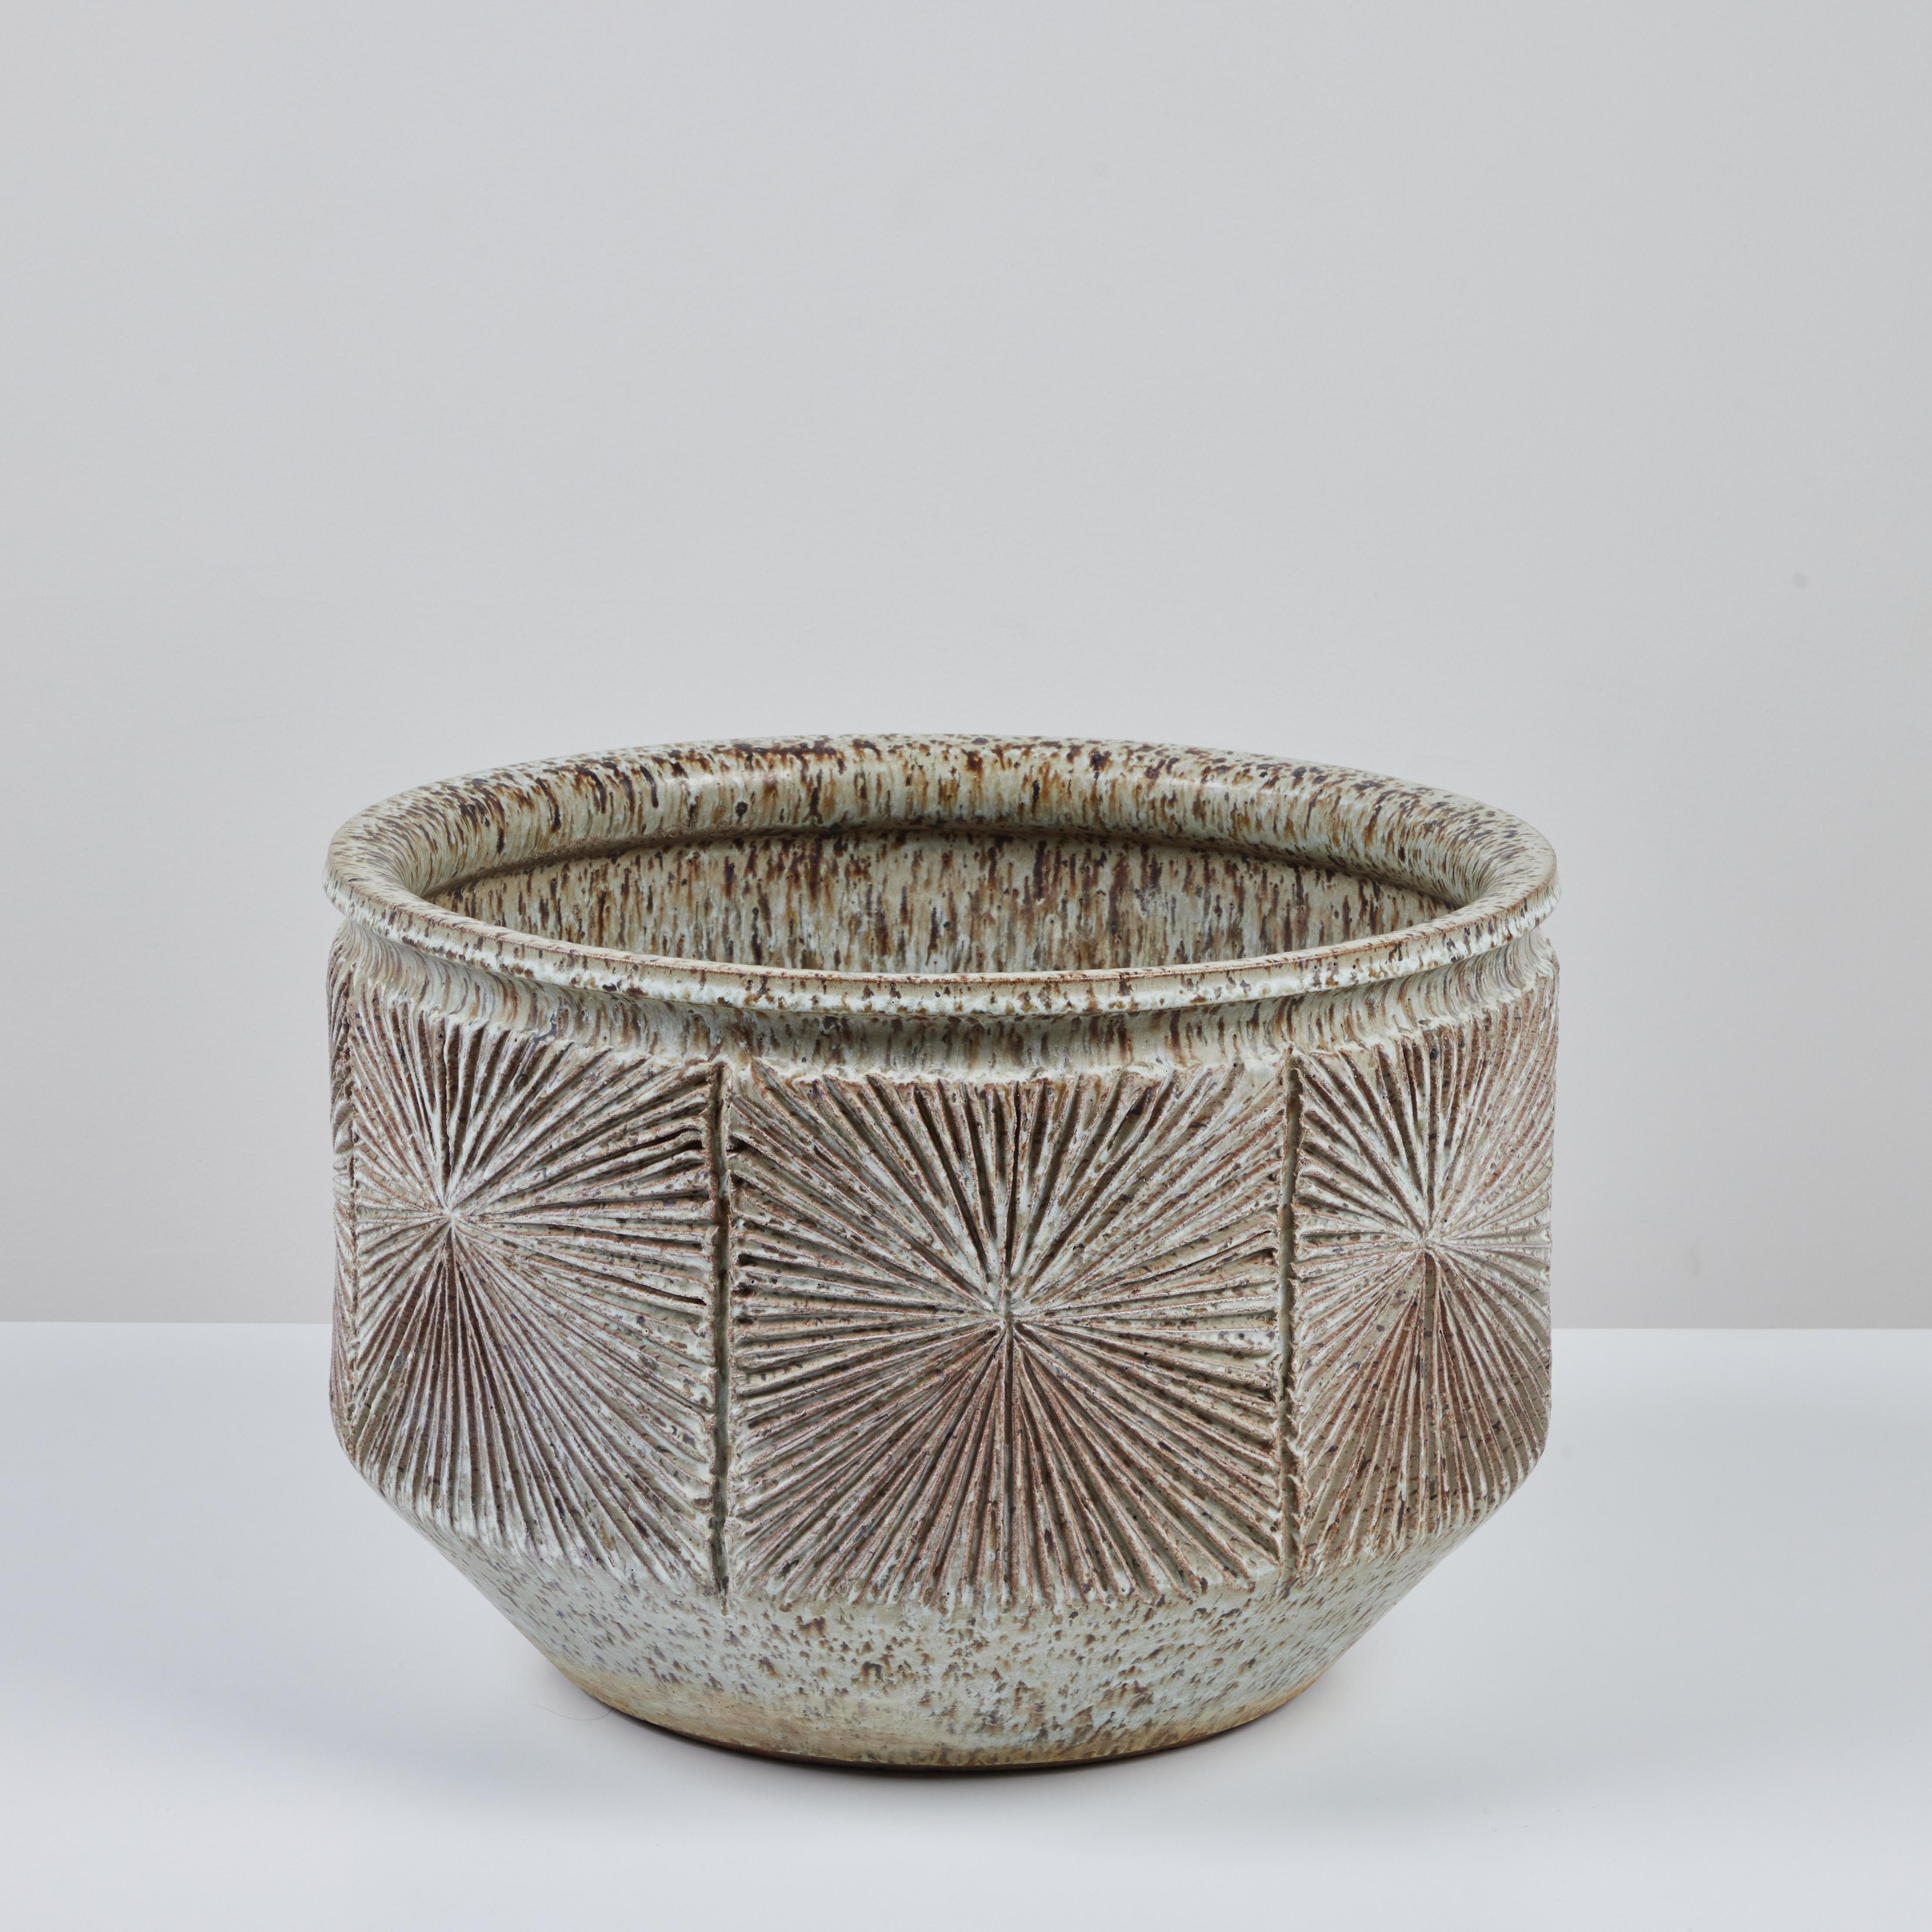 Bowl planter from David Cressey and Robert Maxwell’s 1970s collaboration Earthgender. The planter has a rounded lip and an incised all-over sunburst pattern. It is tapered at its base. The interior and exterior of this piece is glazed in a